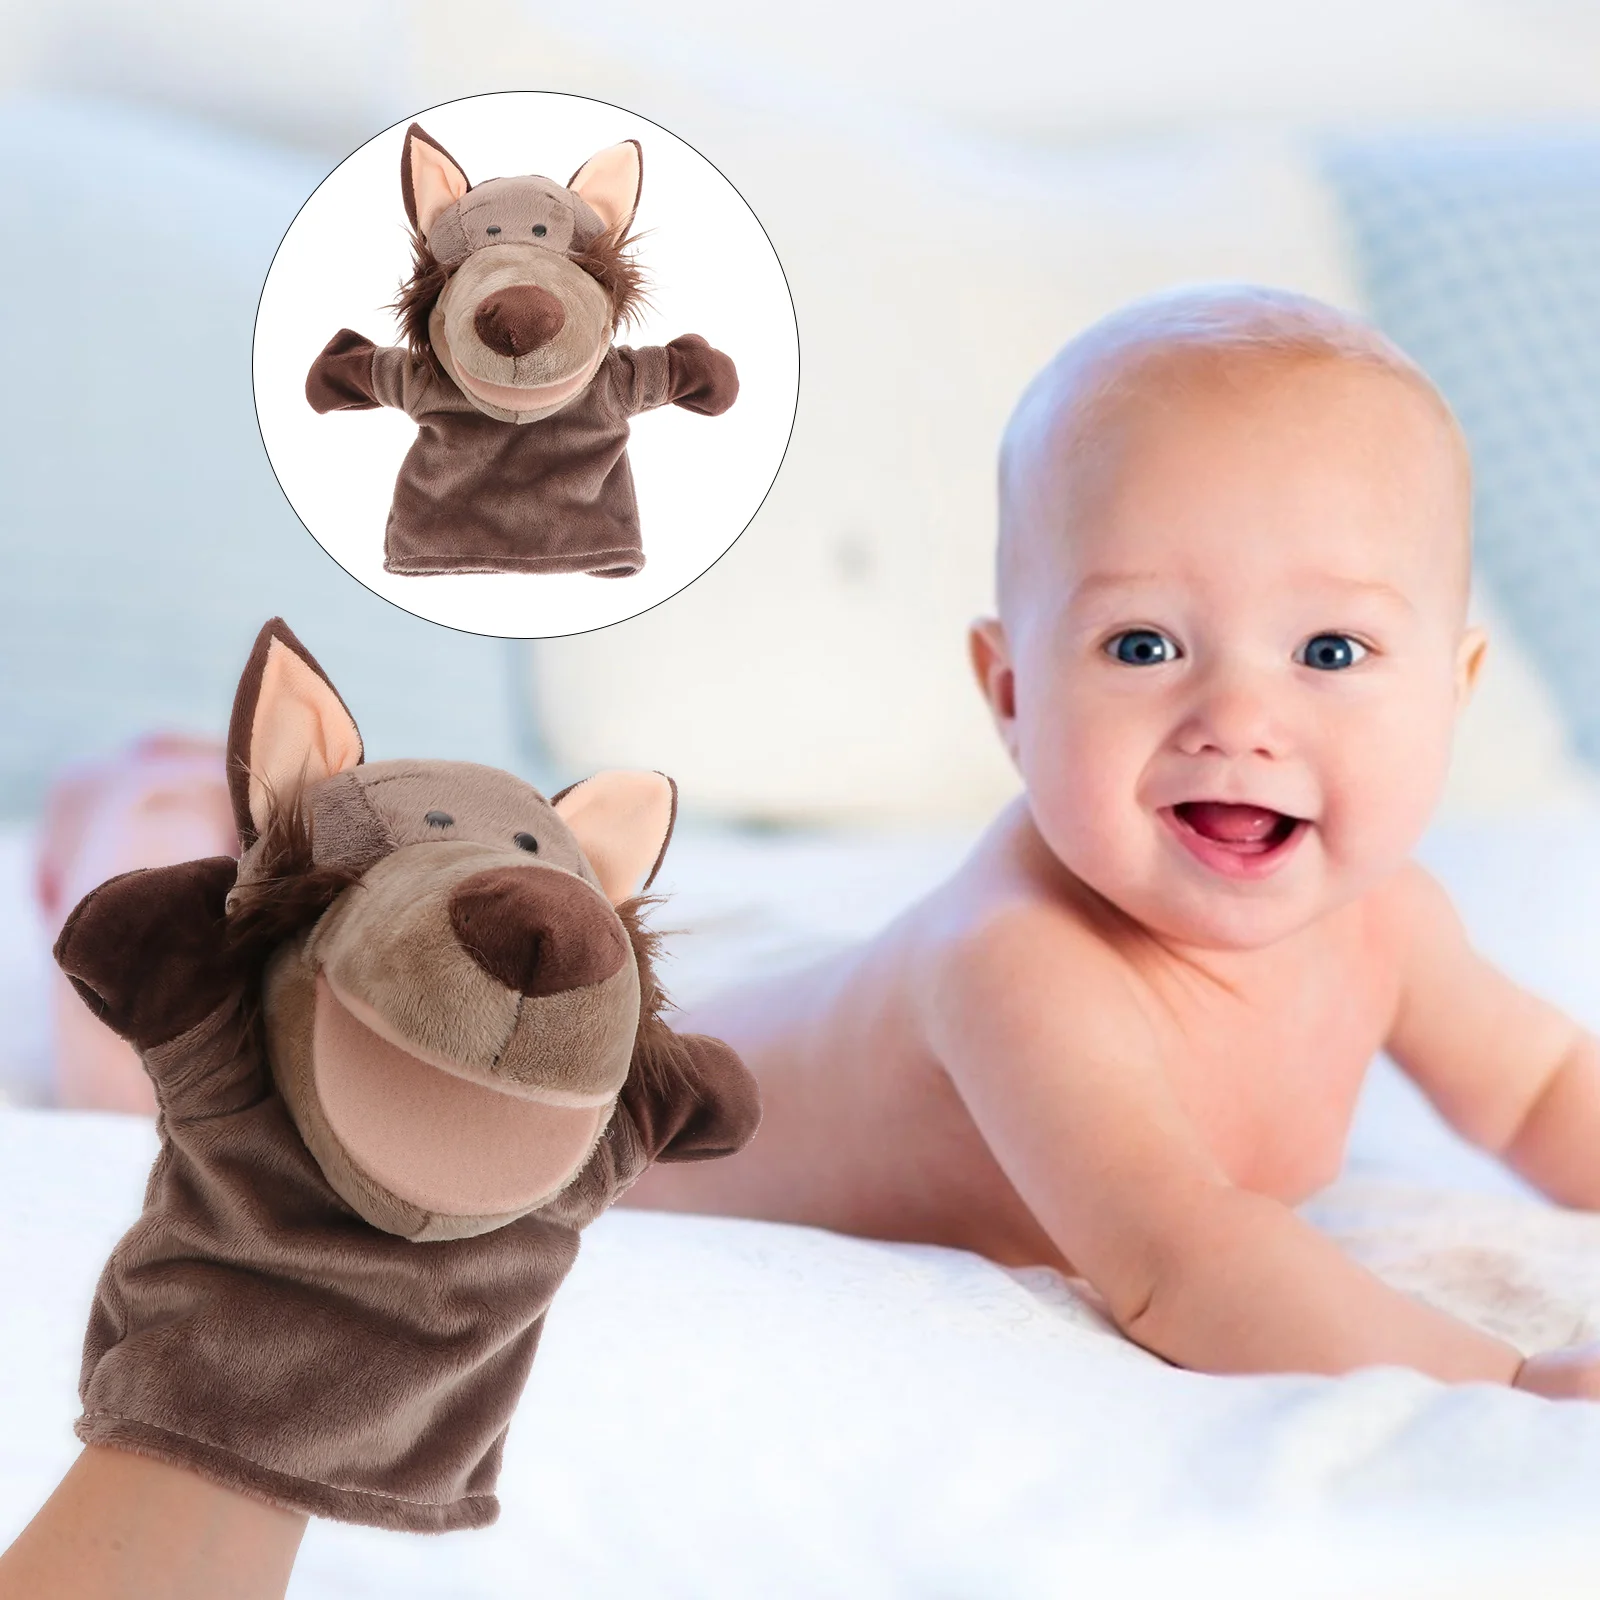 

Hand Puppet Toy Puppets Animal Plush Wolf Finger Story Zoo Role Play Gift Favor Stuffed Party Birthday Cartoon Baby Toddler Cute